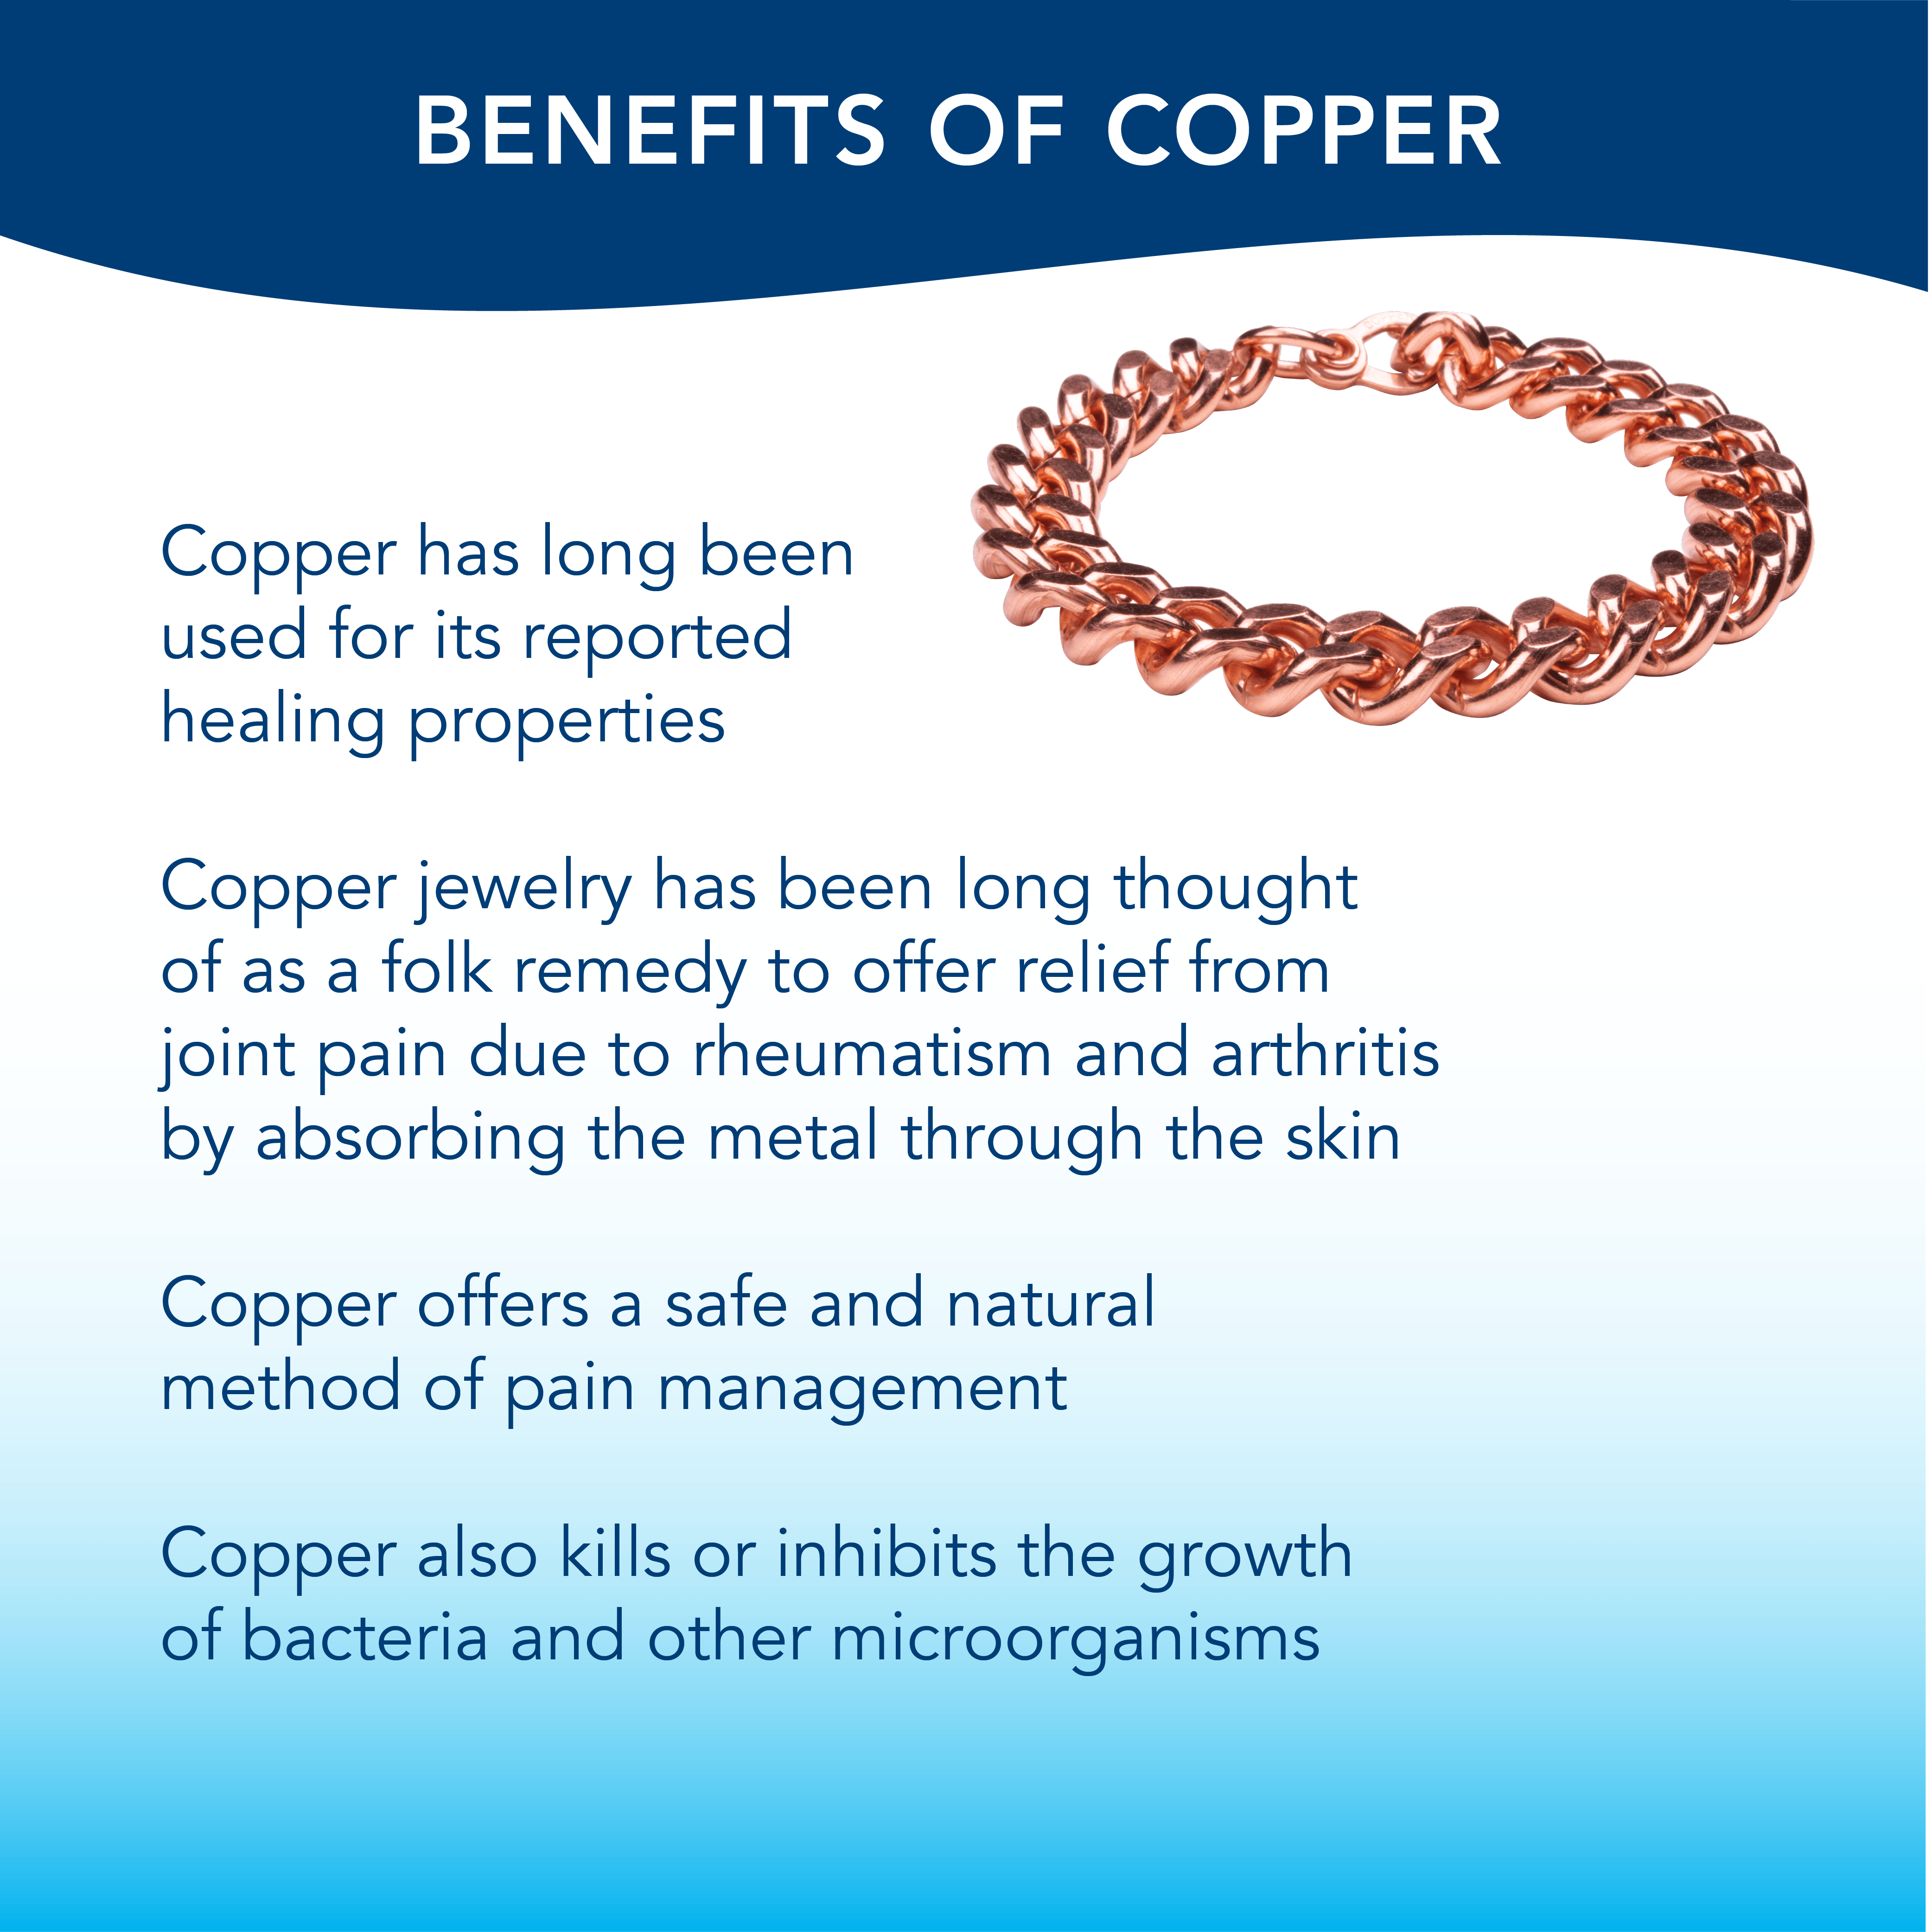 How Copper Bracelets Can Help With Arthritis And Joint Pain?